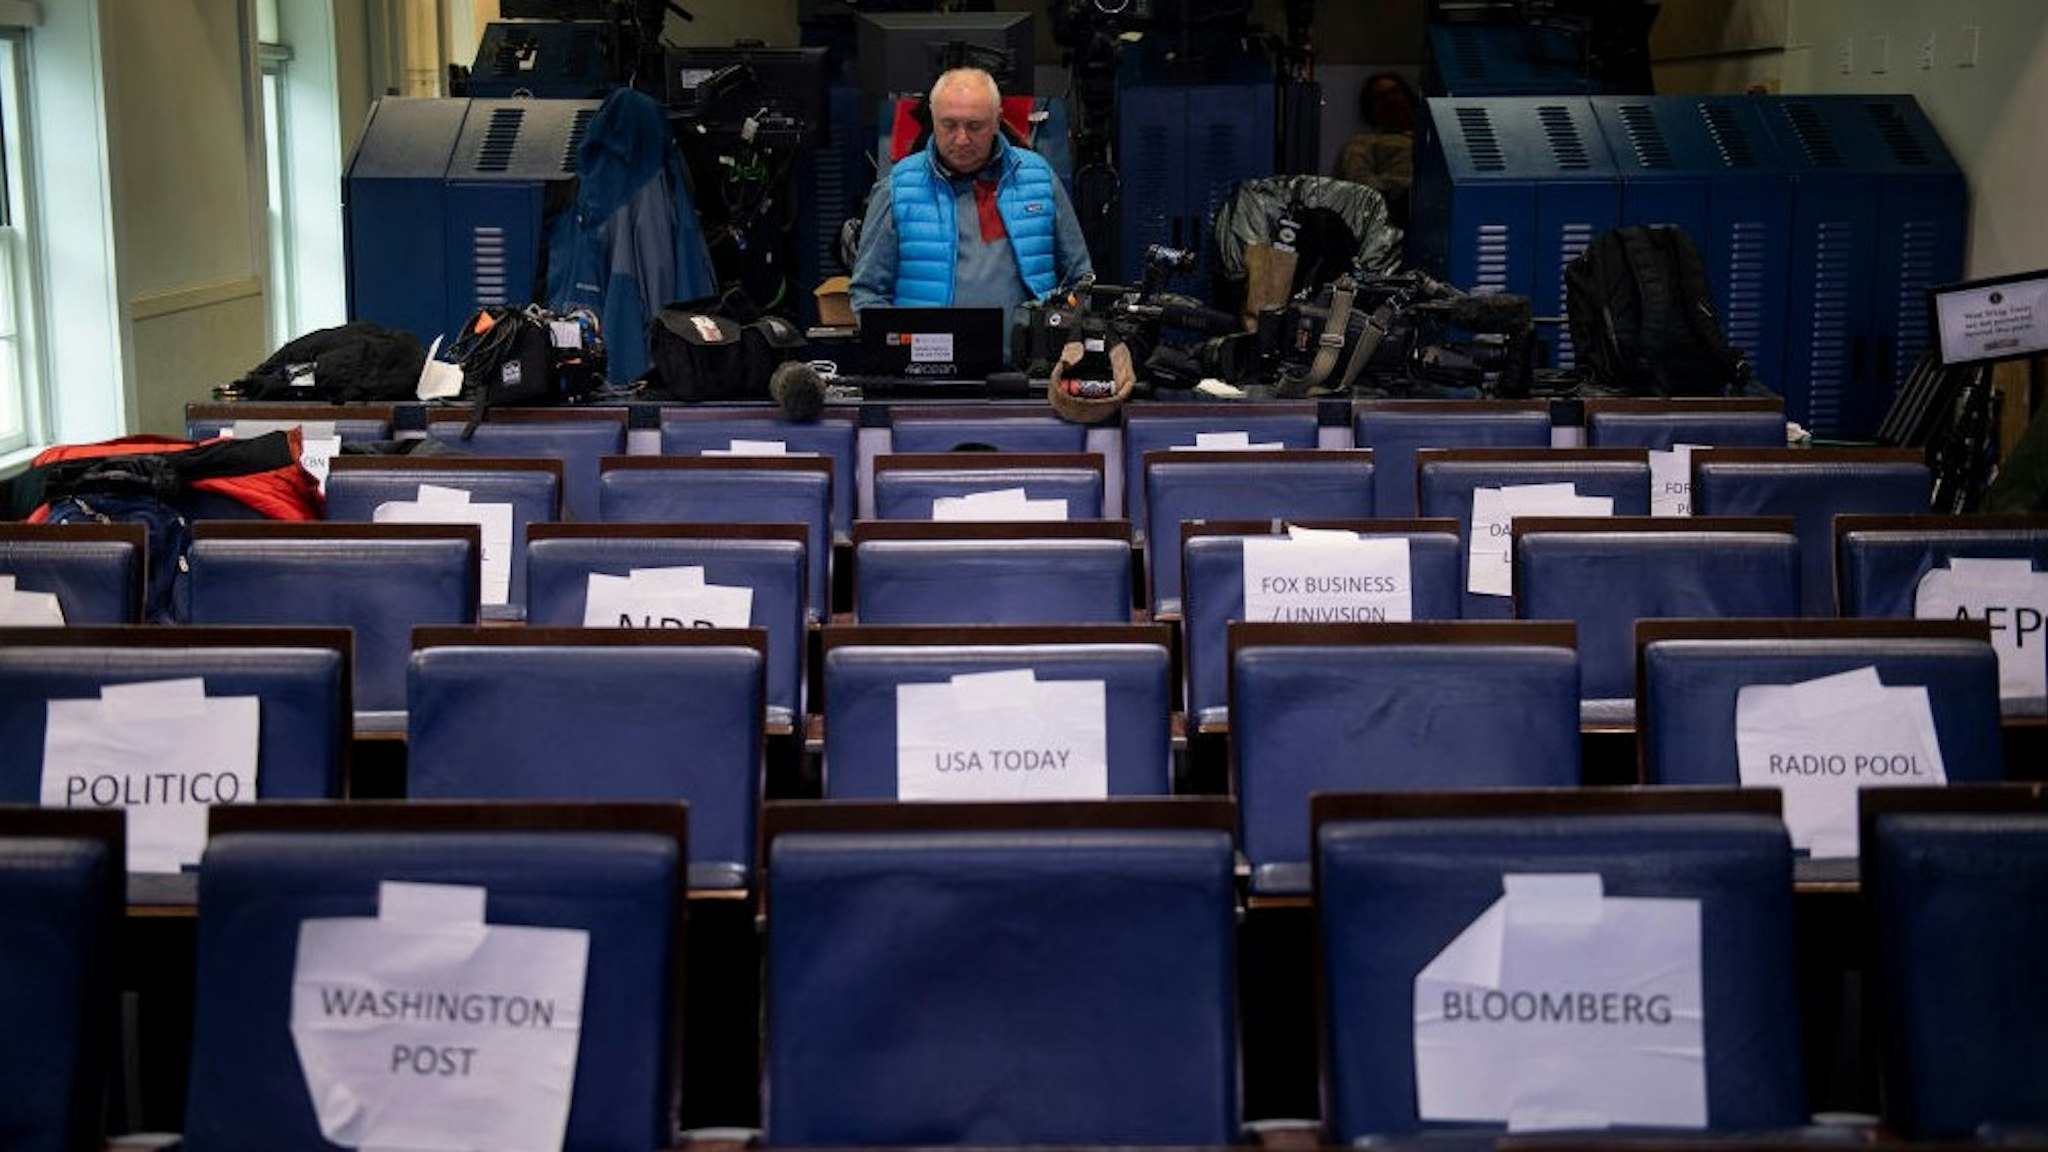 A TV journalist waits in the press briefing room of the White House March 23, 2020, in Washington, DC. (Photo by Brendan Smialowski / AFP) (Photo by